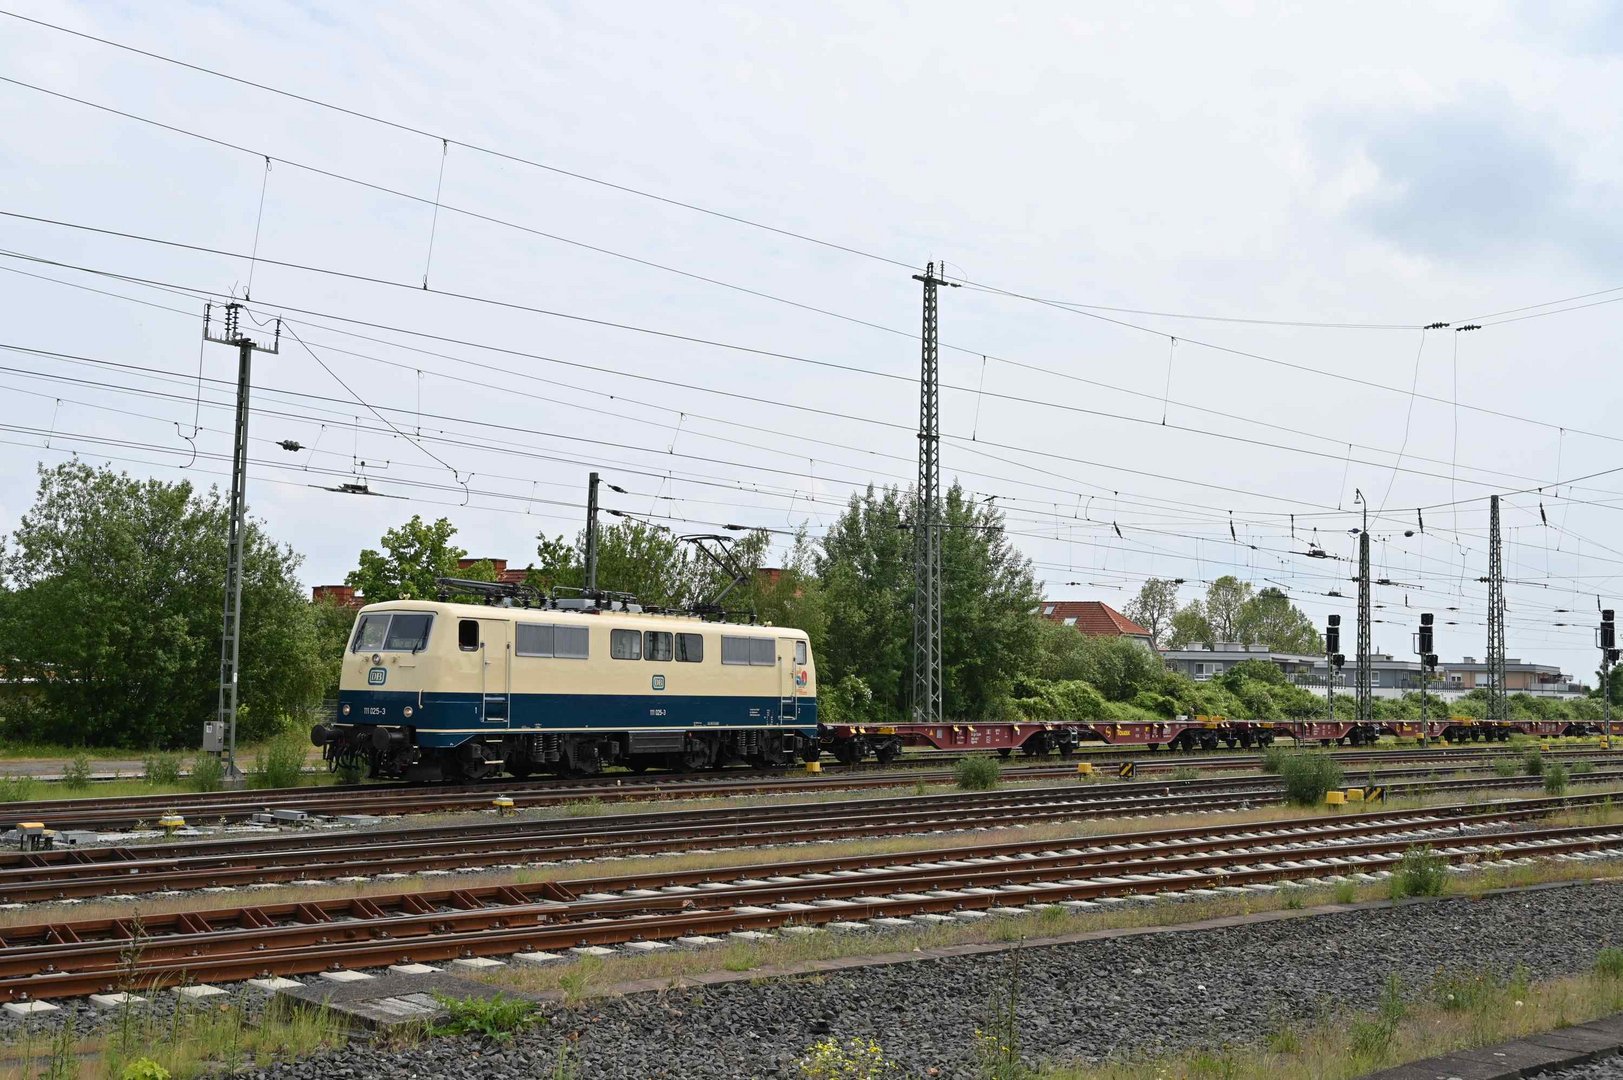 BR111 025